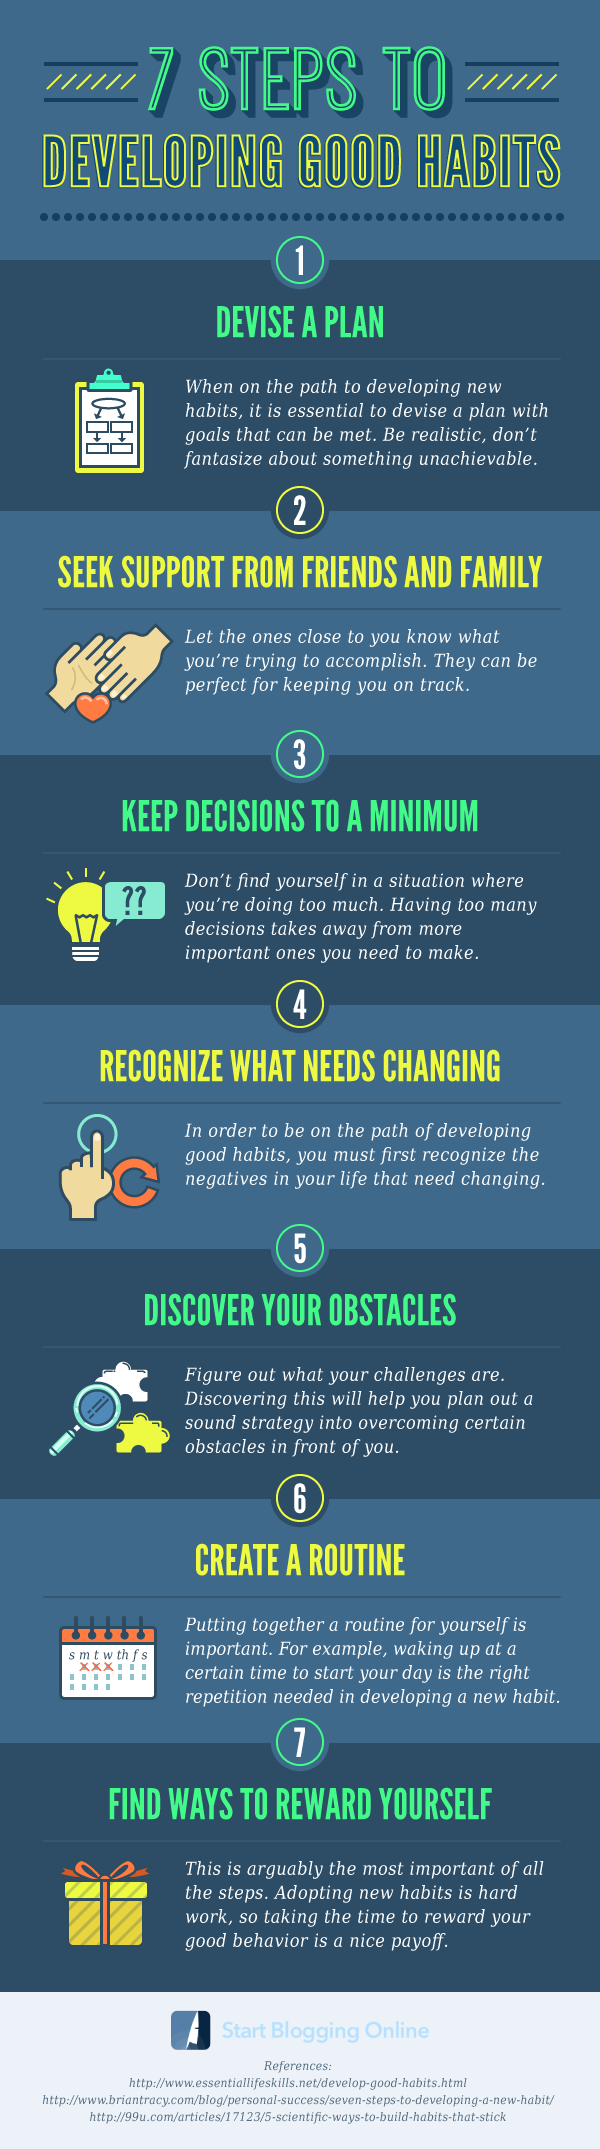 7 Amazing Steps To Developing Good Habits